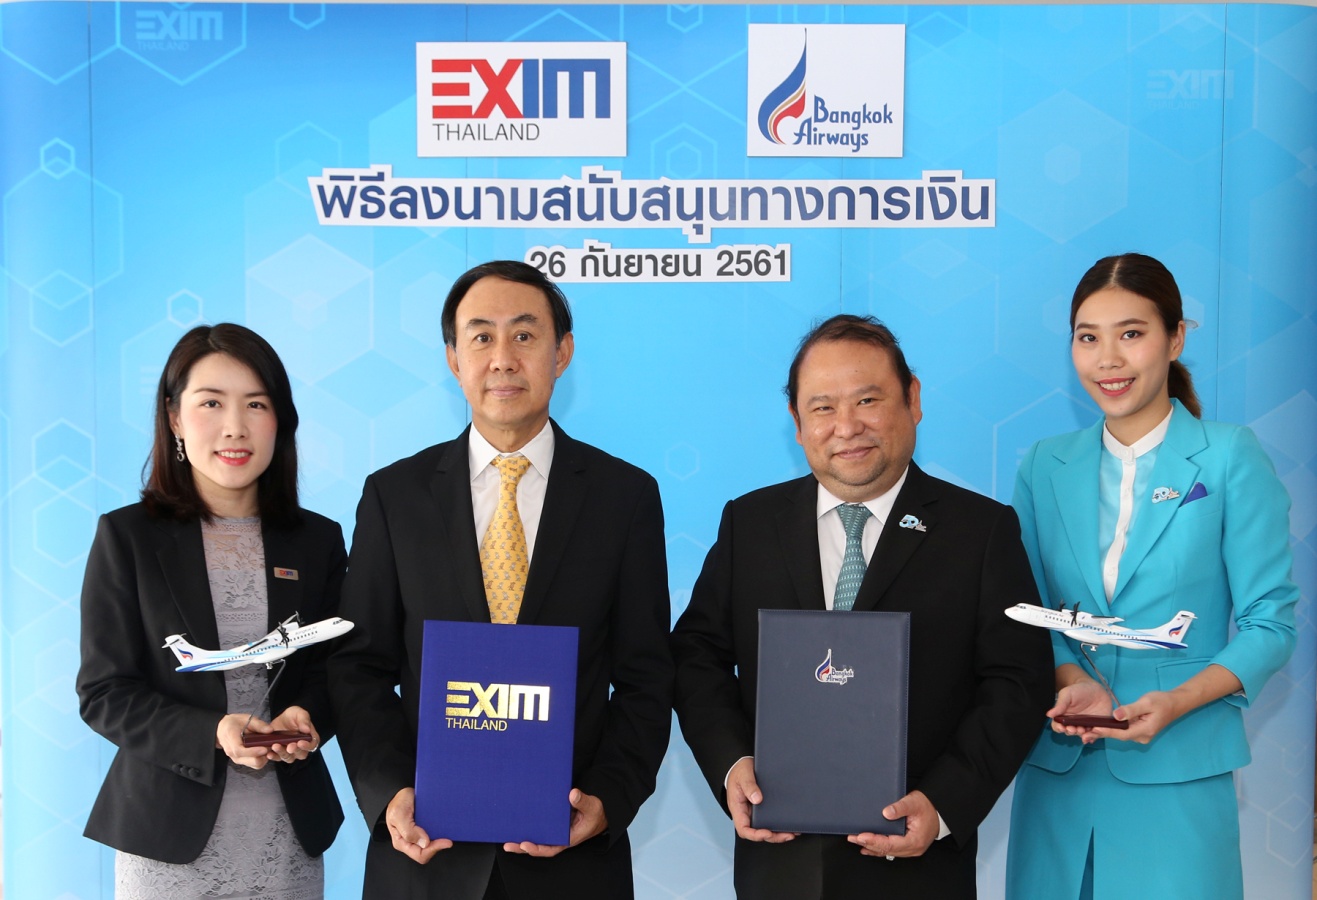 EXIM Thailand Finances Bangkok Airways’ Acquisition of Aircraft to Serve Route Expansion and Economic Growth in Asia